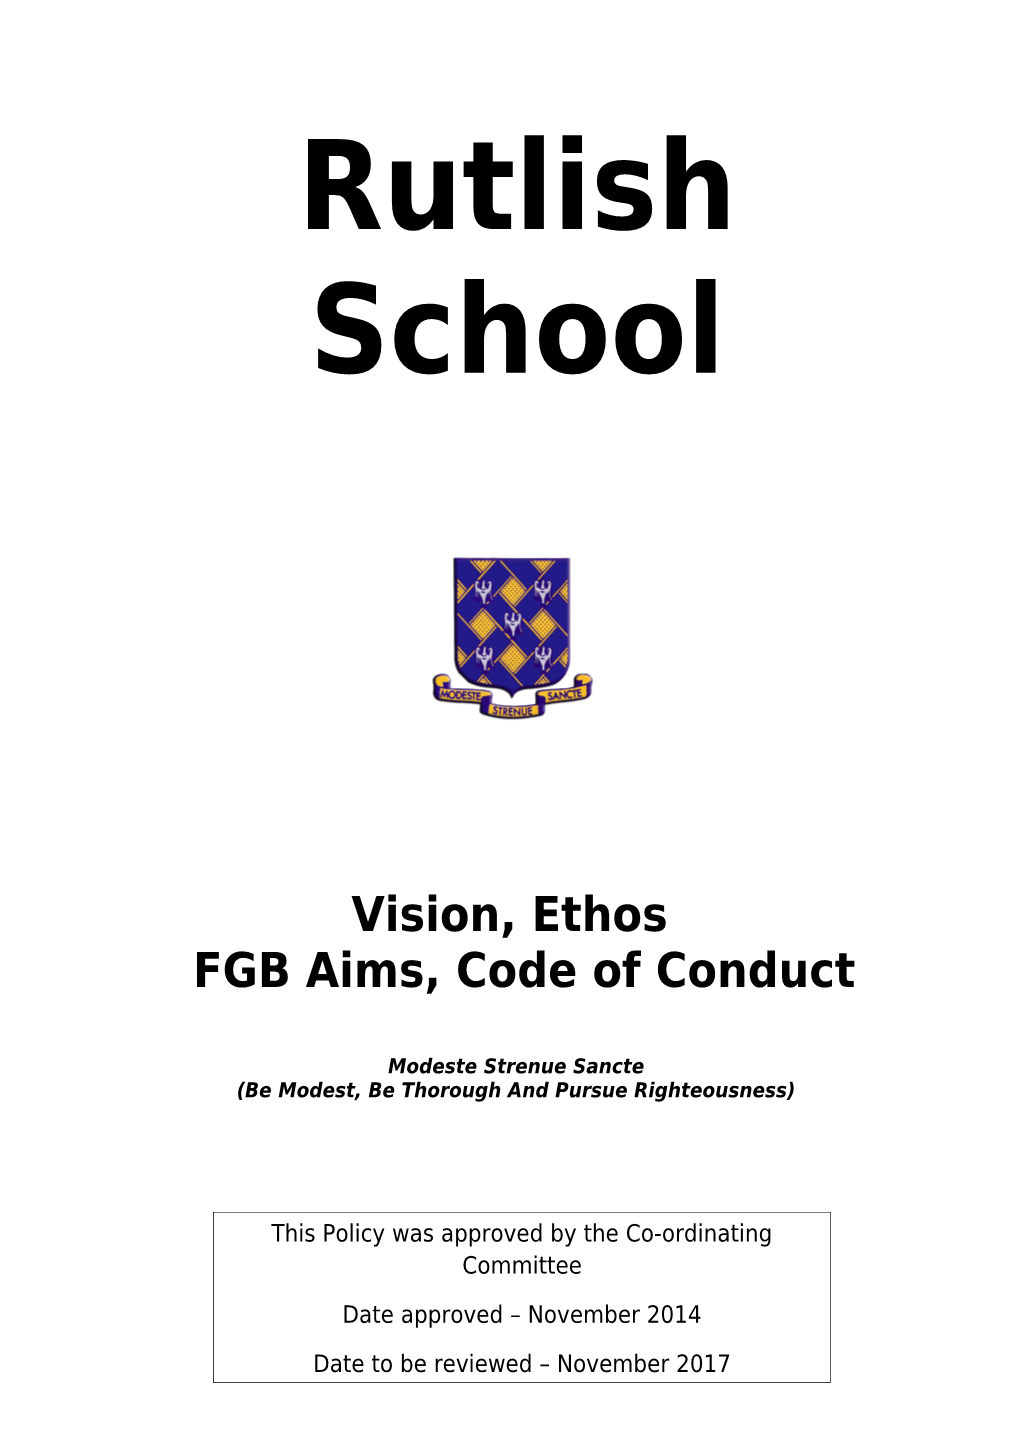 FGB Aims, Code of Conduct